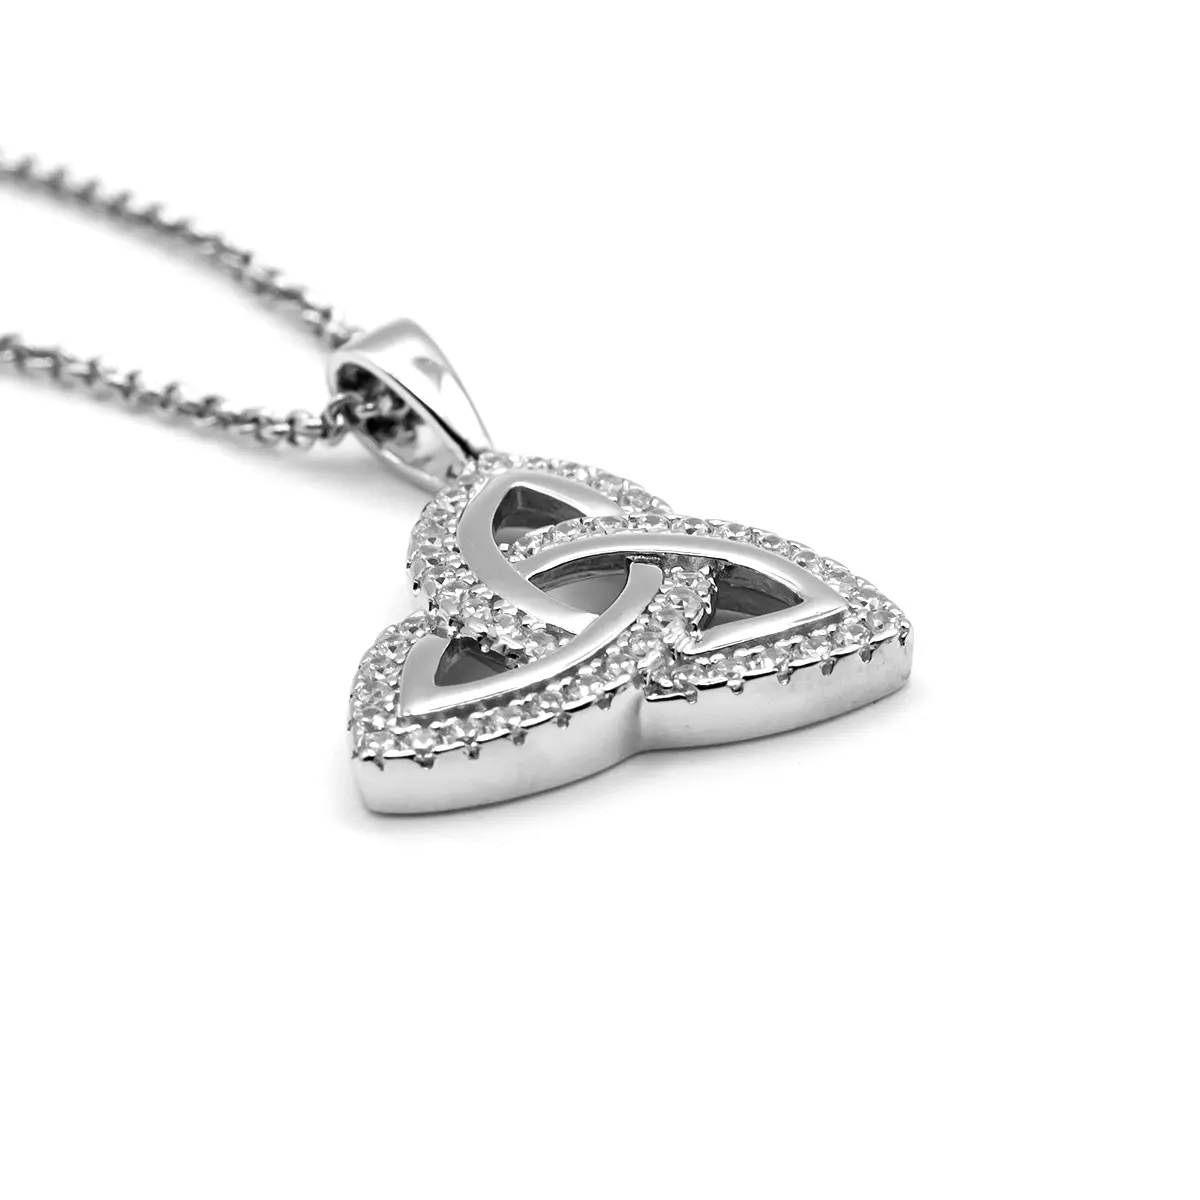 Sterling Silver Trinity Knot Pendant Inlaid With Cubic Zirconia Gemstones 10...